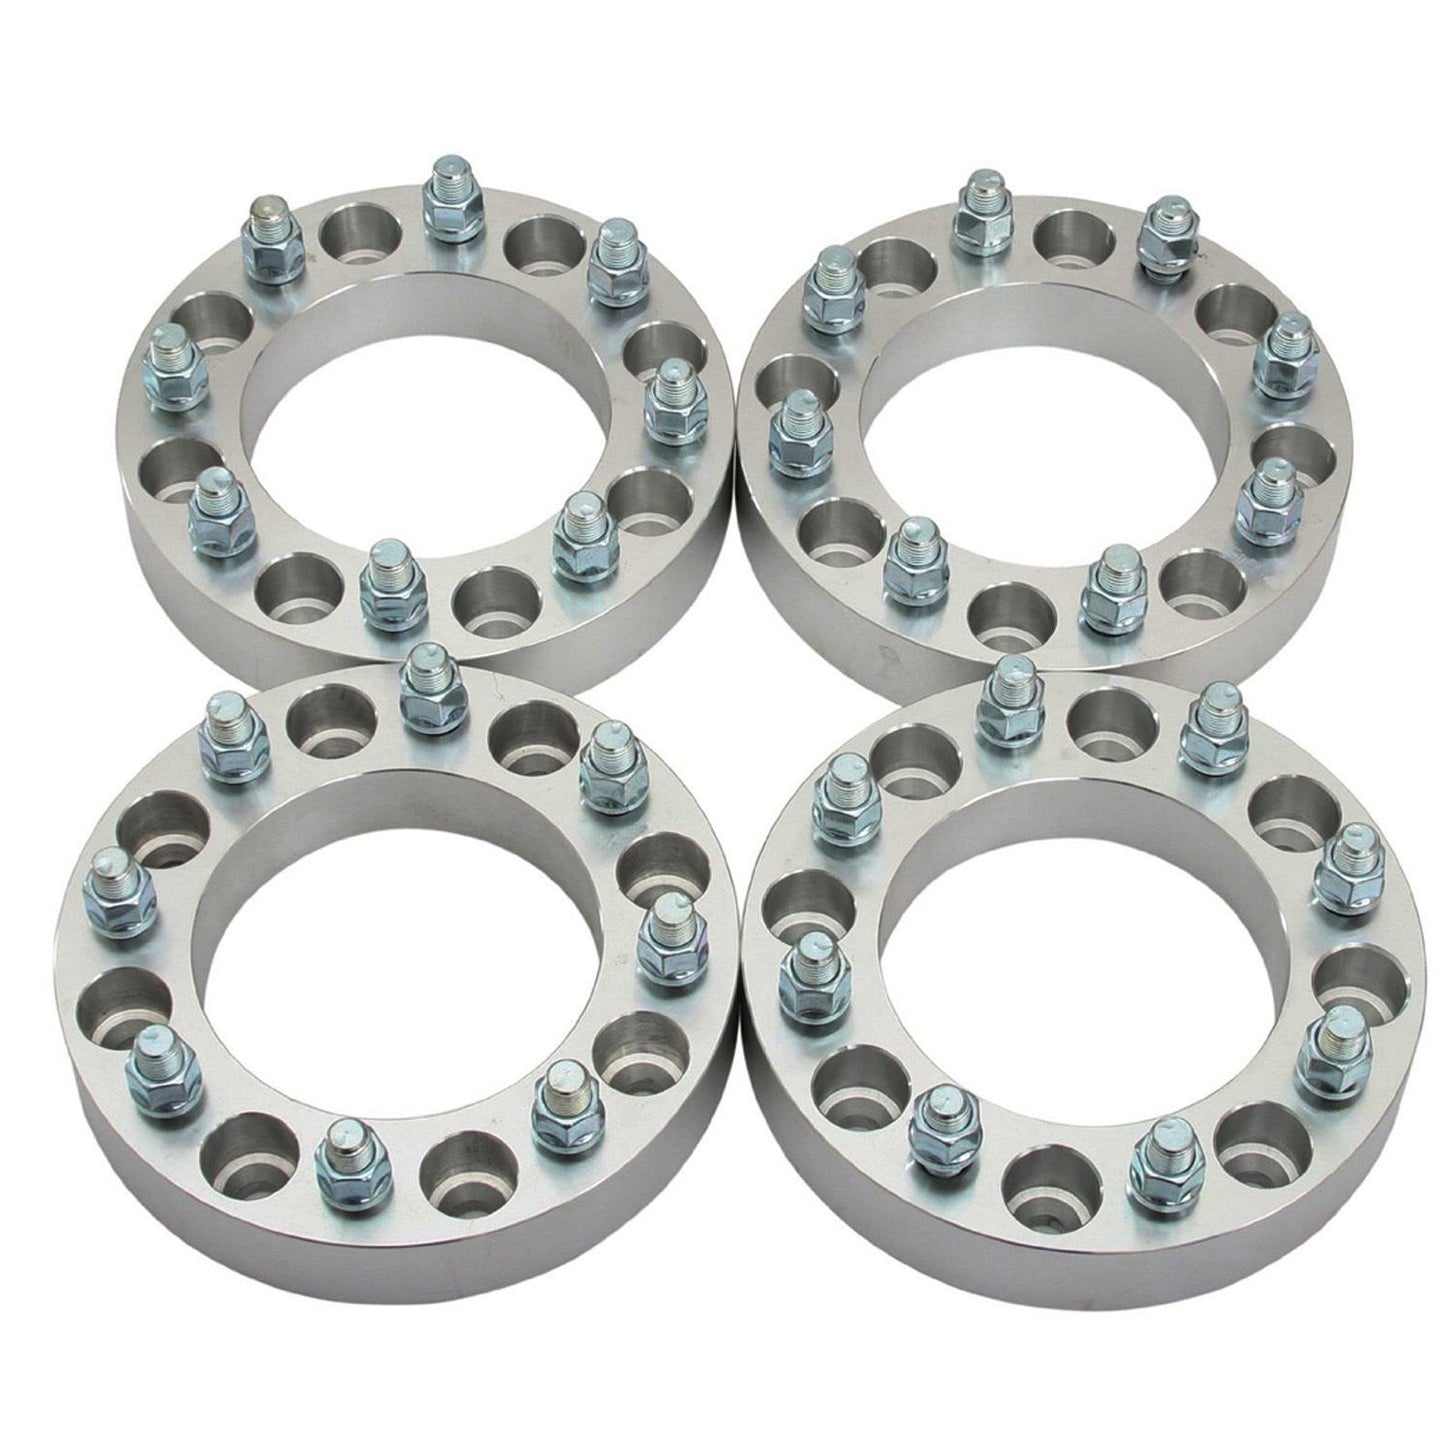 2 pairs 1.25" For Ford 250 350 | 8 x170 to 8 x170 Wheel Spacers Adapters 14x1.5 Stud